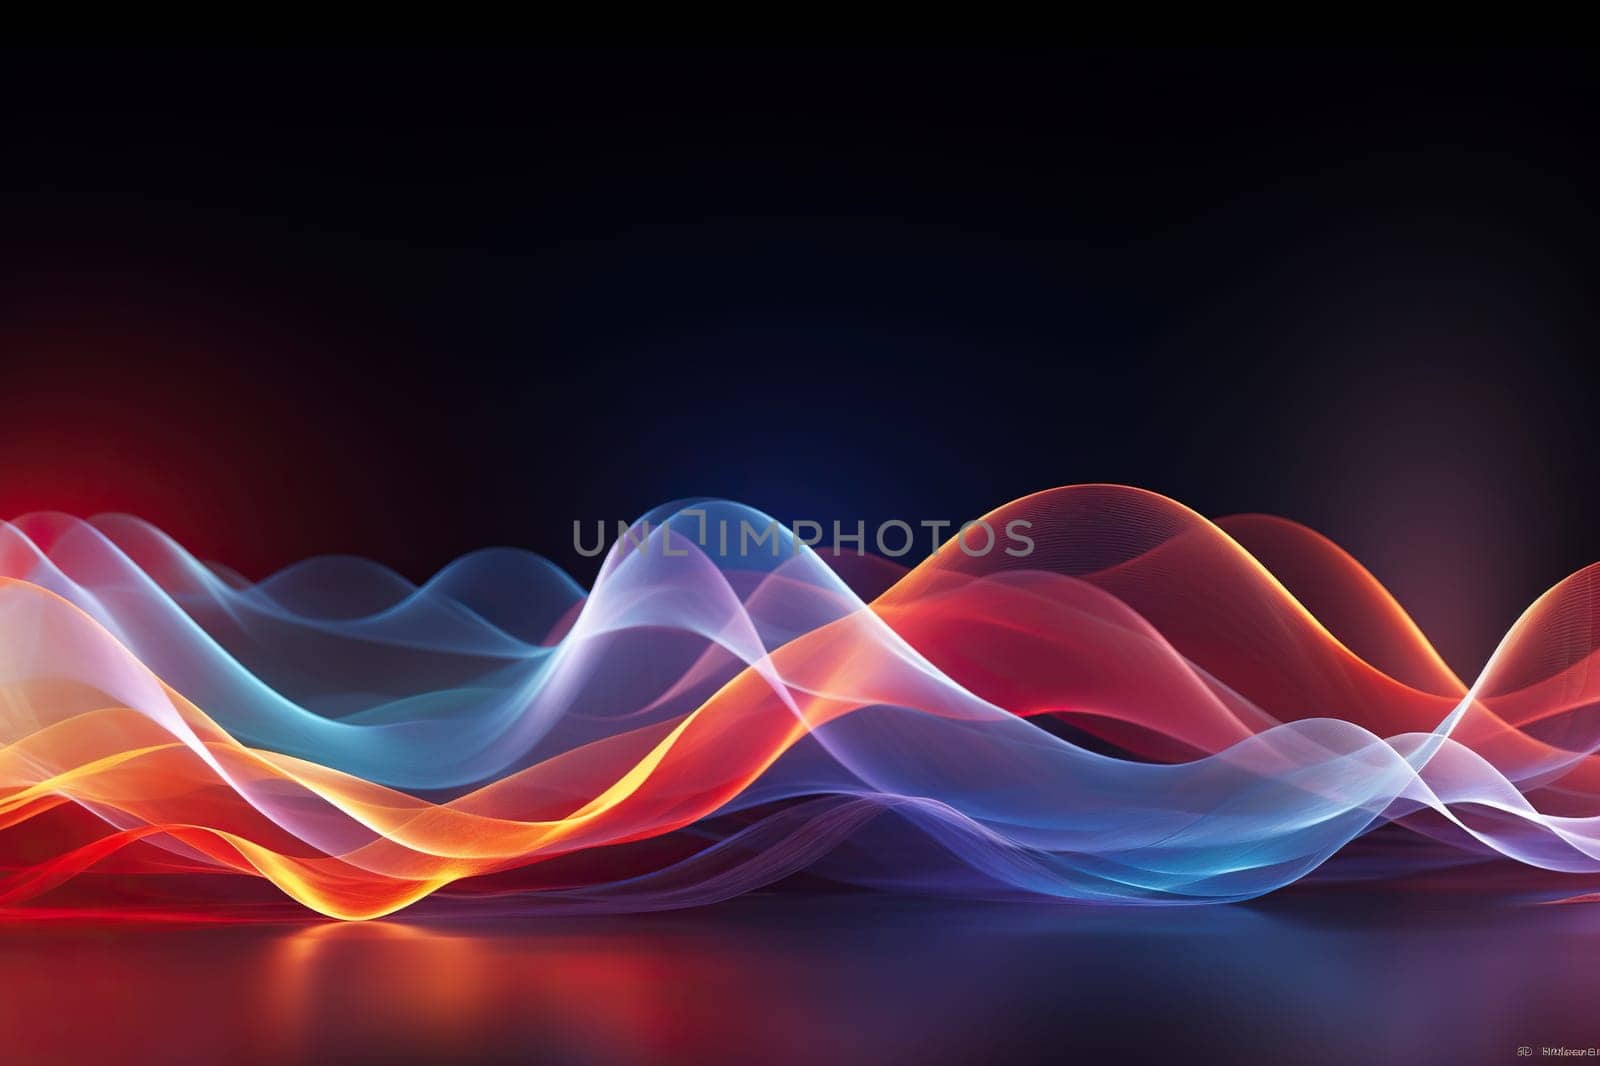 Abstract colored wave pattern with liquid effect. Place for text.